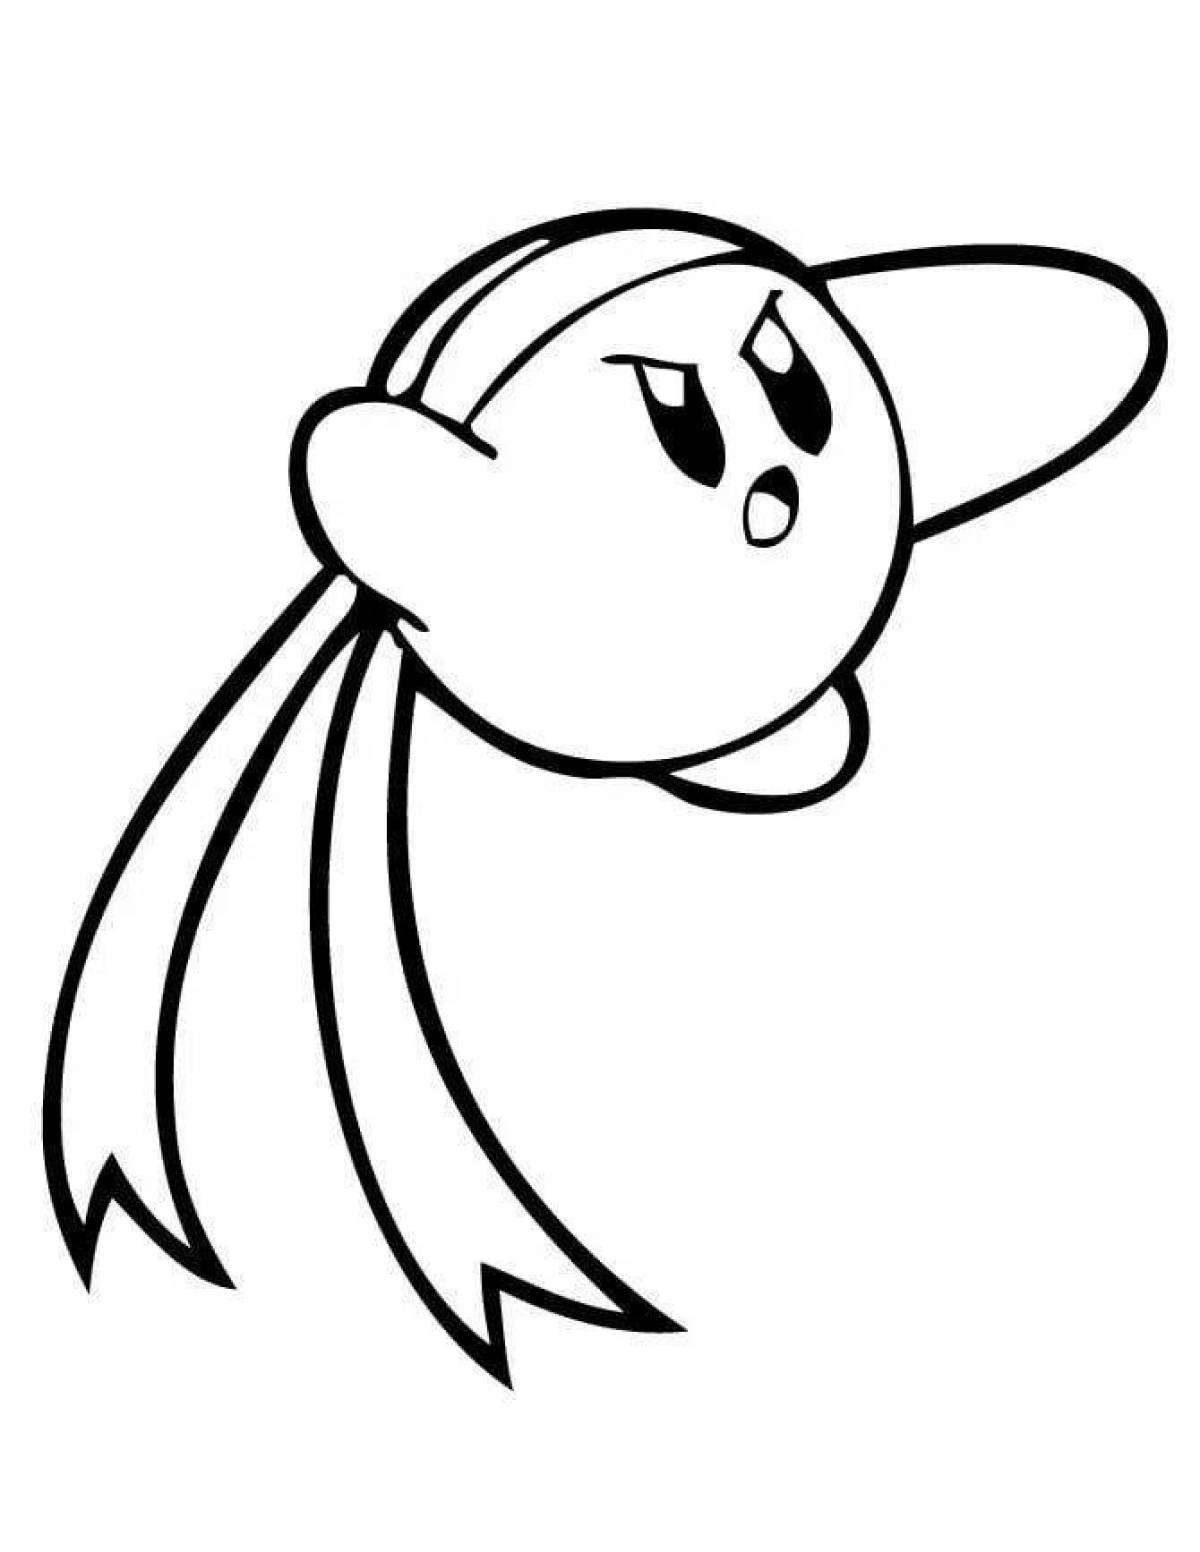 Adorable kirby coloring page